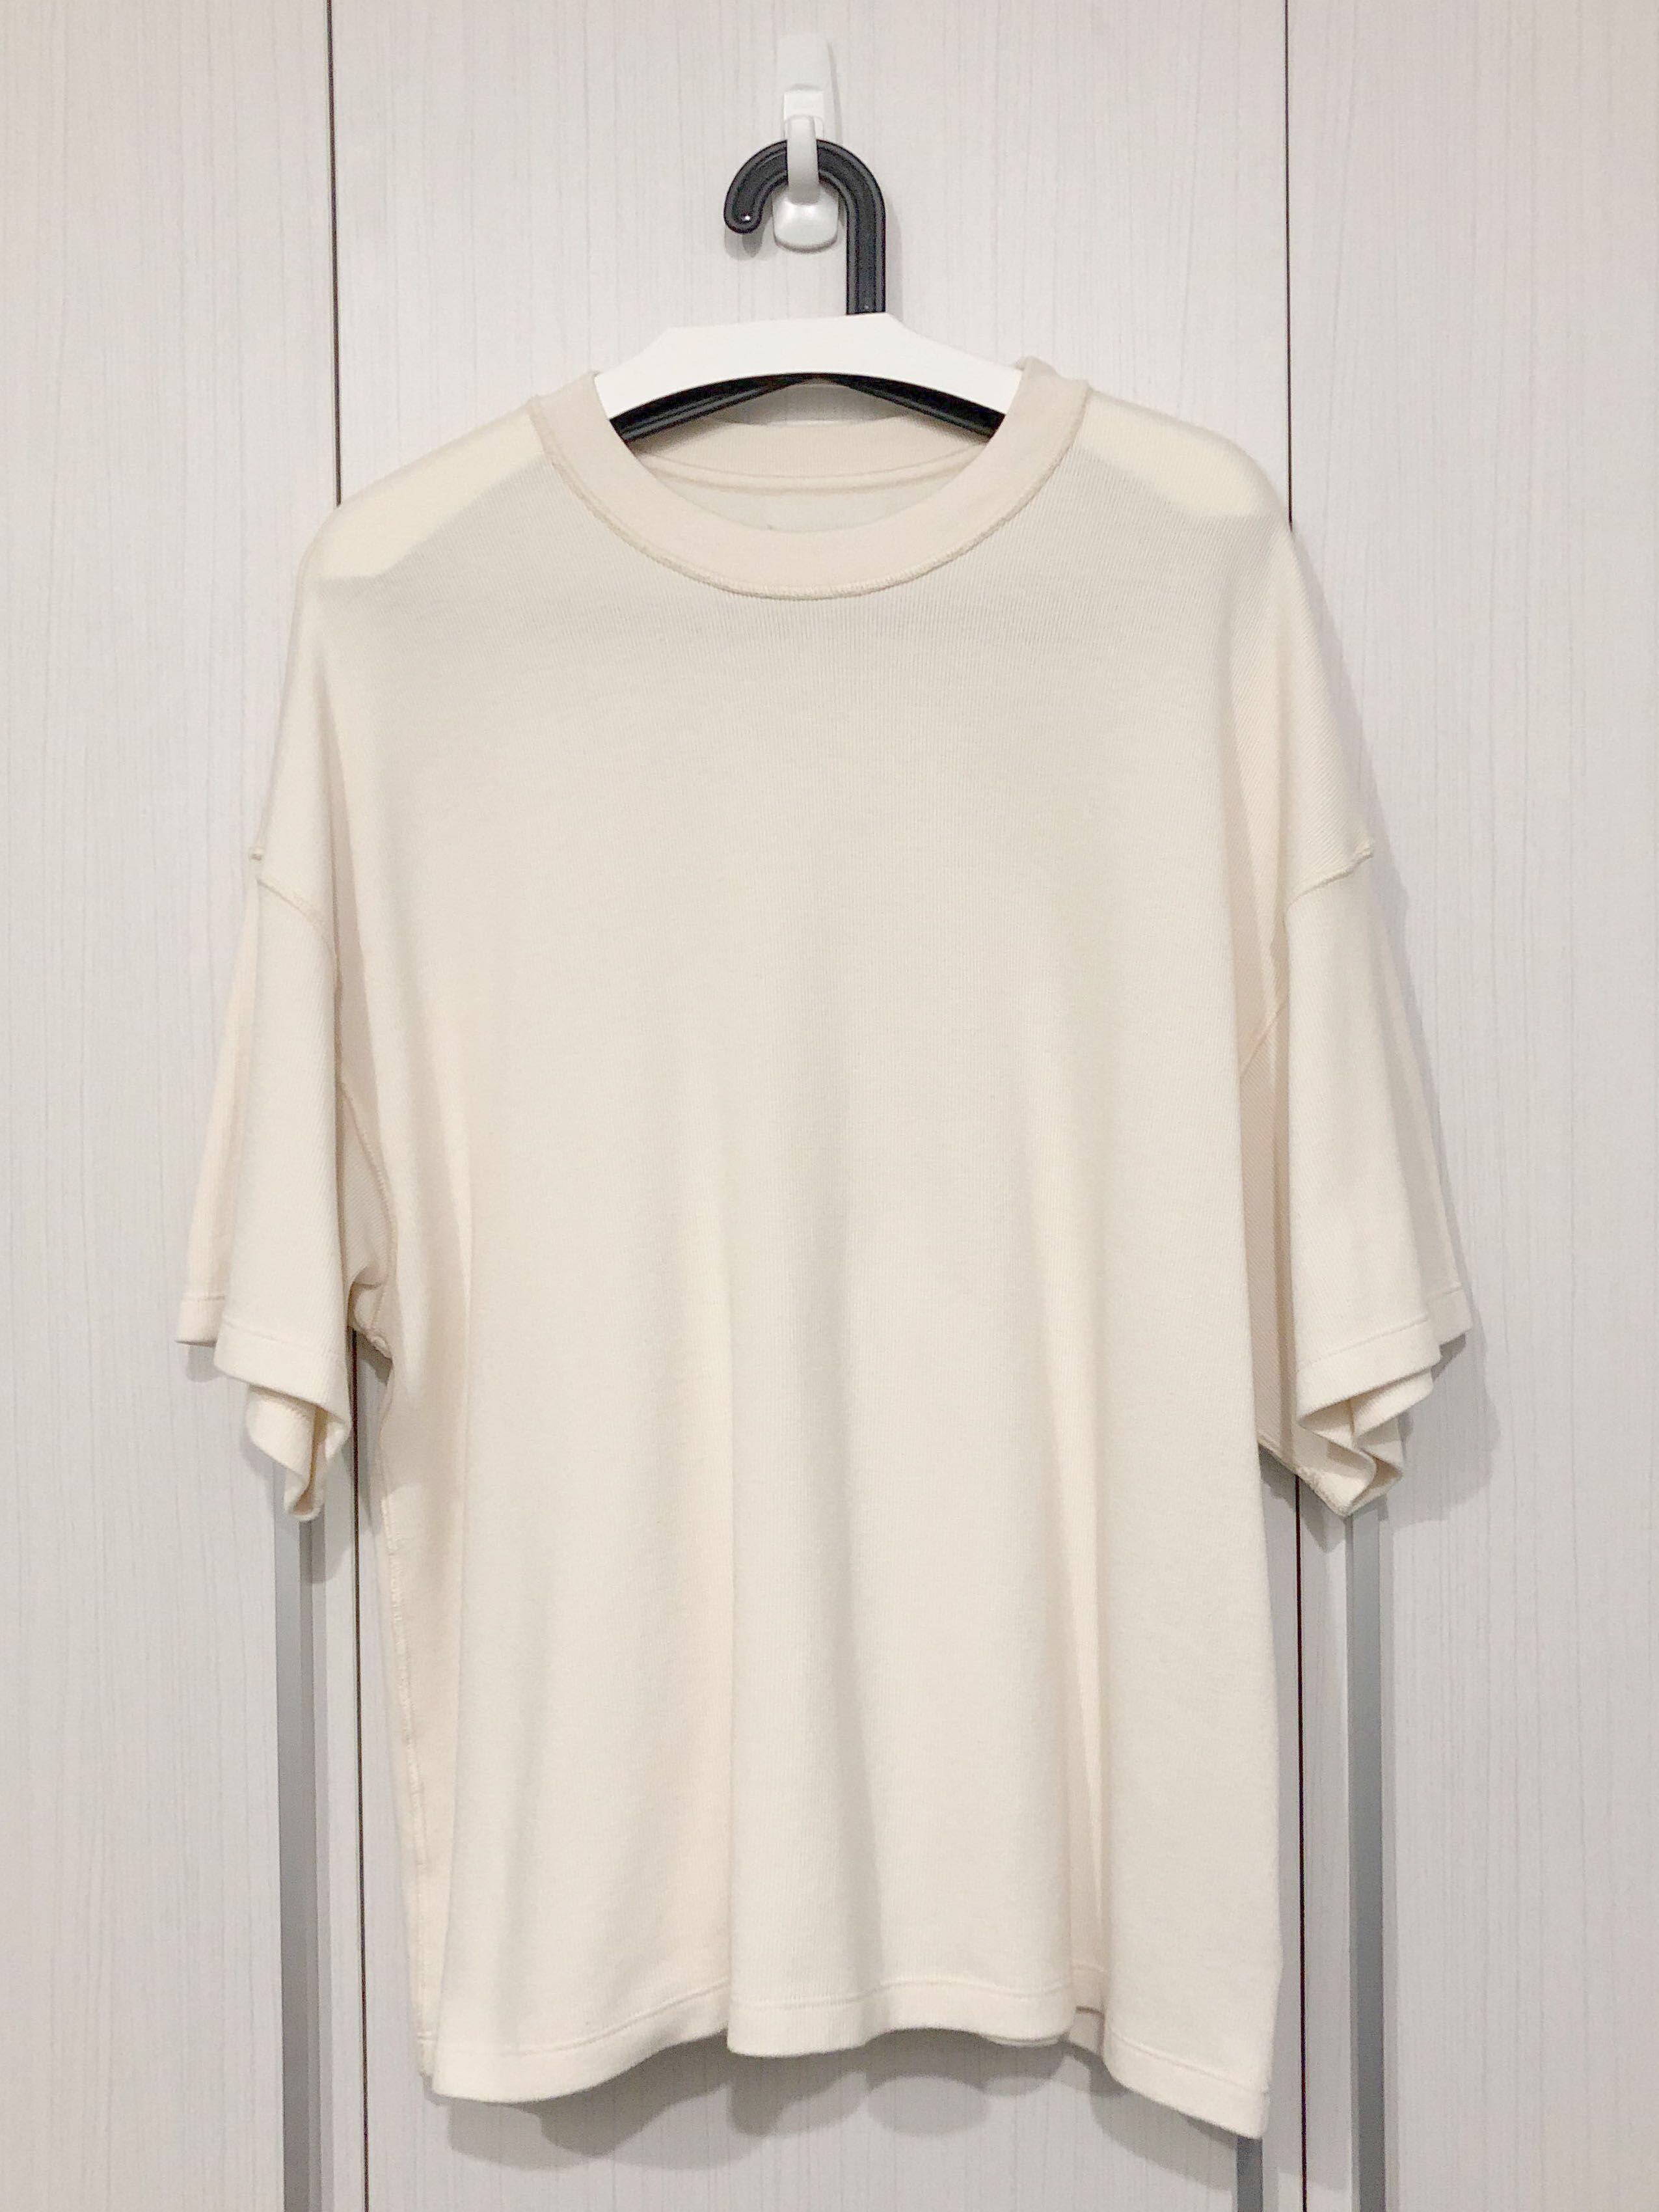 FEAR OF GOD  5th inside out  Tee  XL